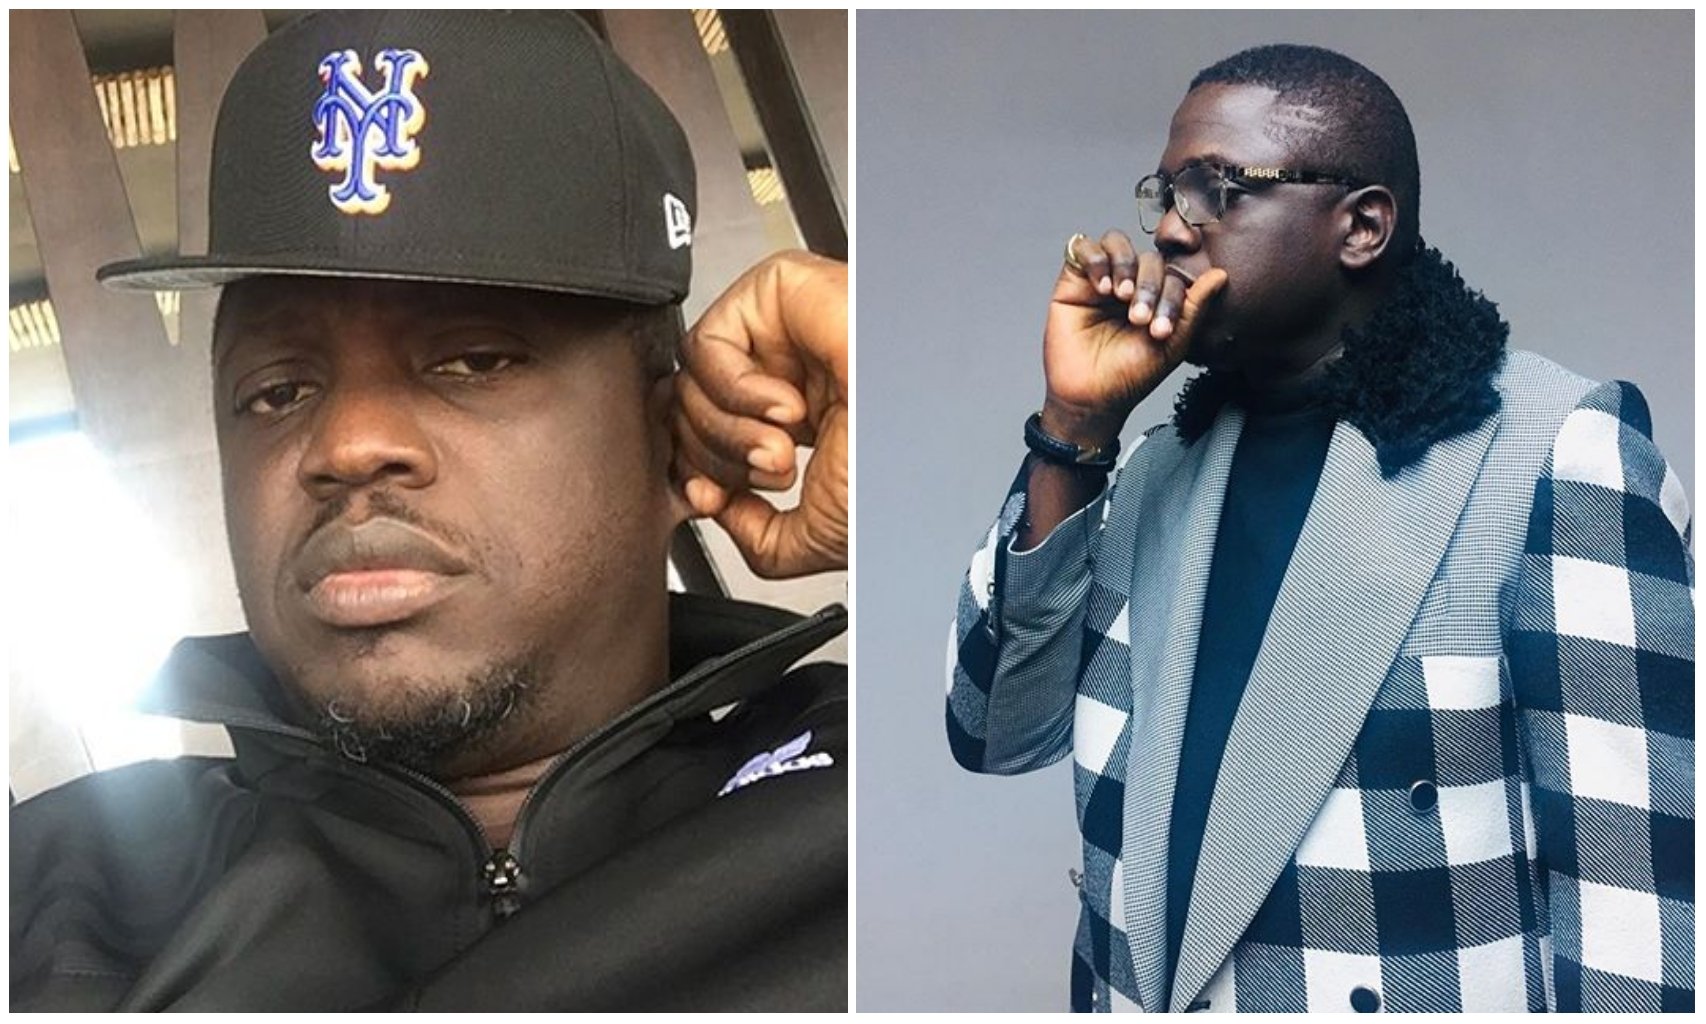 Don’t be fooled, Most of these entertainers are dead broke — Rapper illbliss